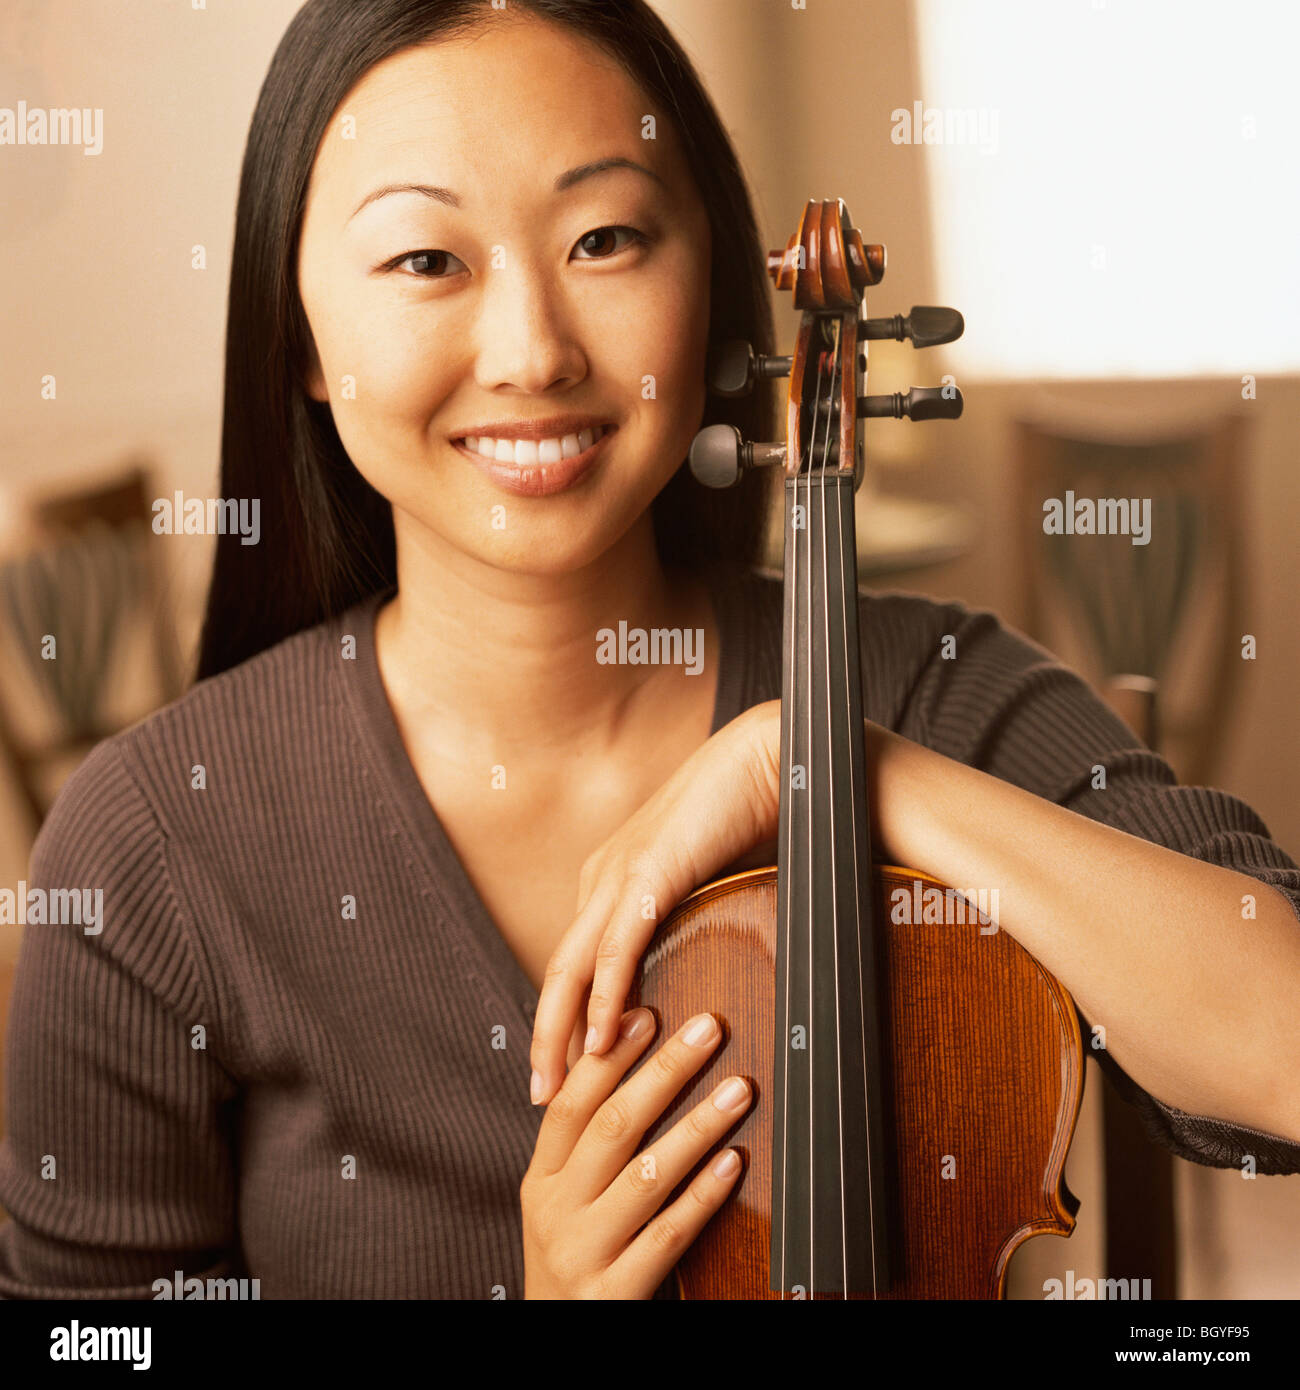 Portrait of woman with a violin Stock Photo